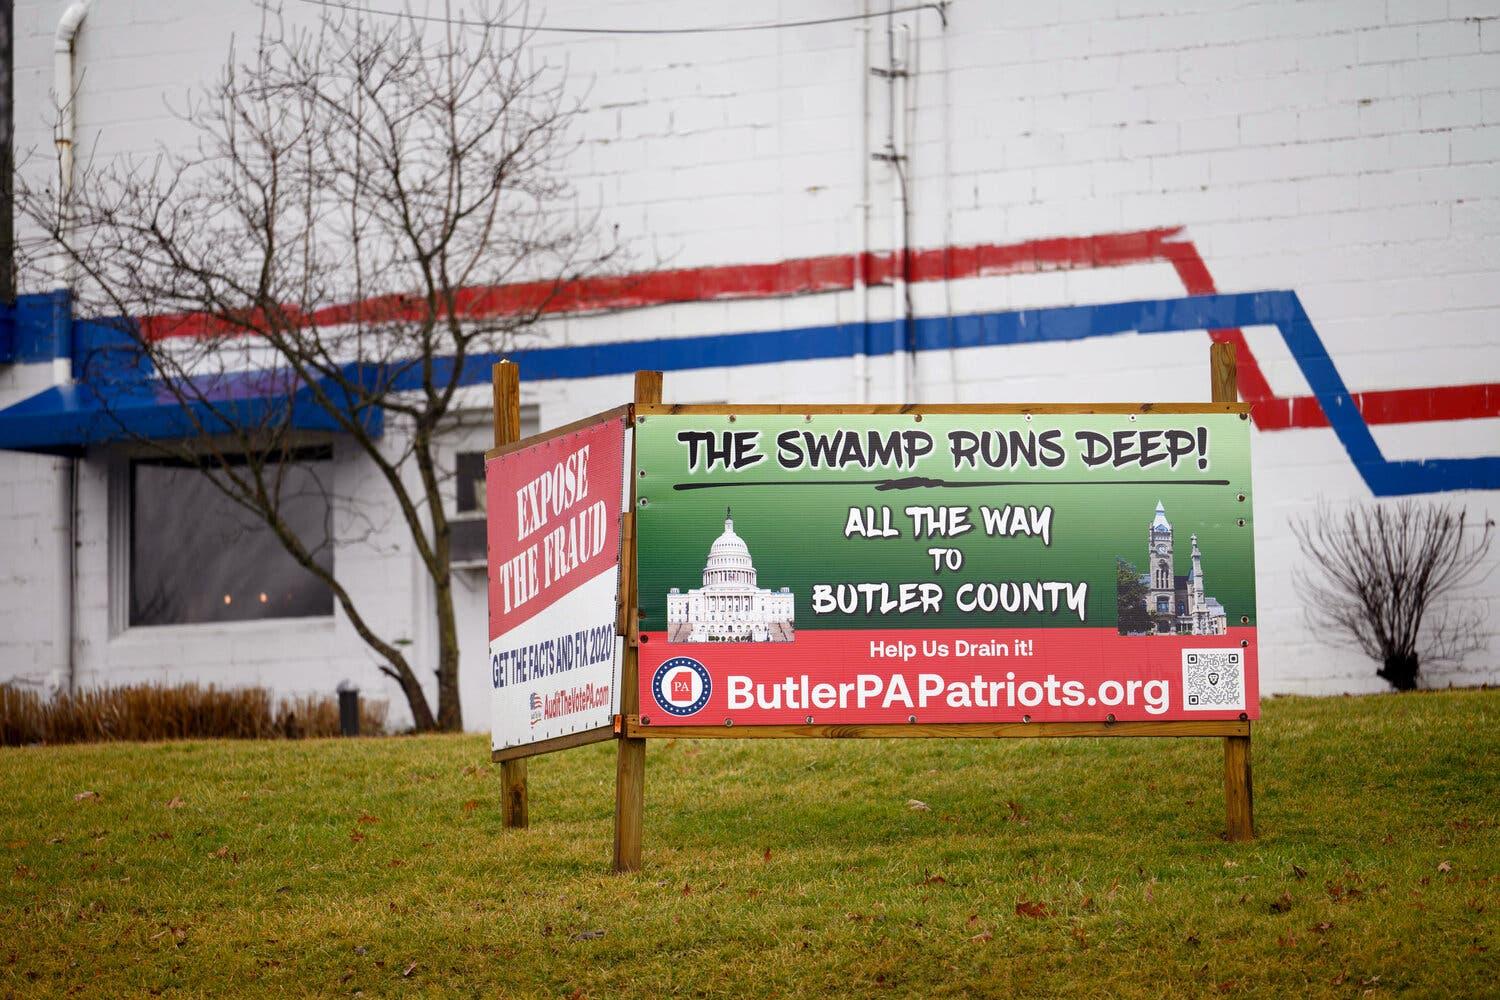 A sign says “The swamp runs deep! All the way to Butler County.”